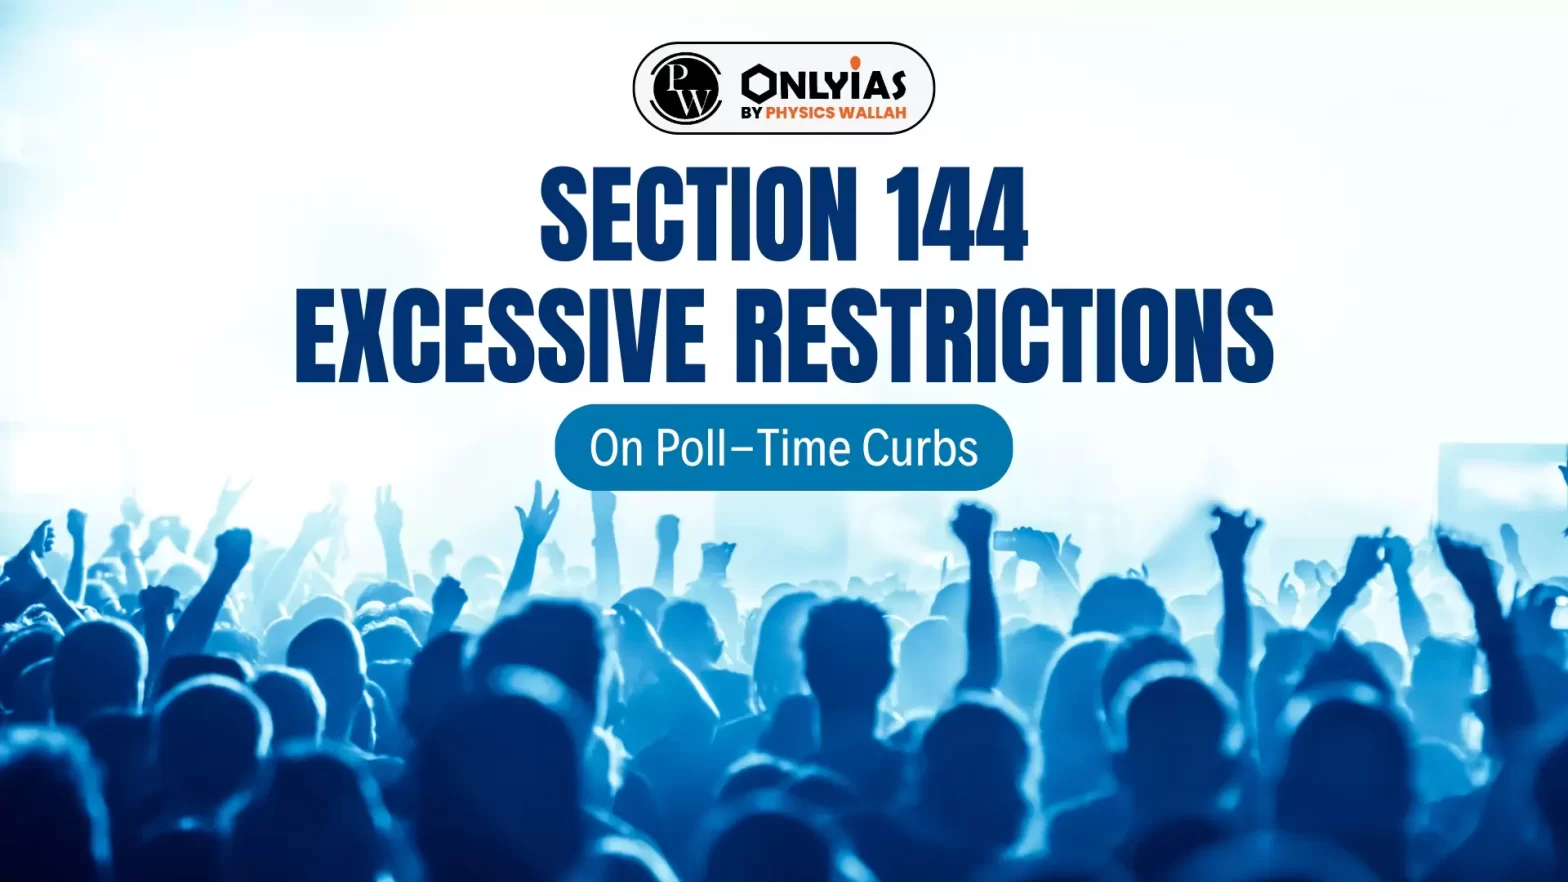 Section 144, Excessive Restrictions: On Poll-Time Curbs